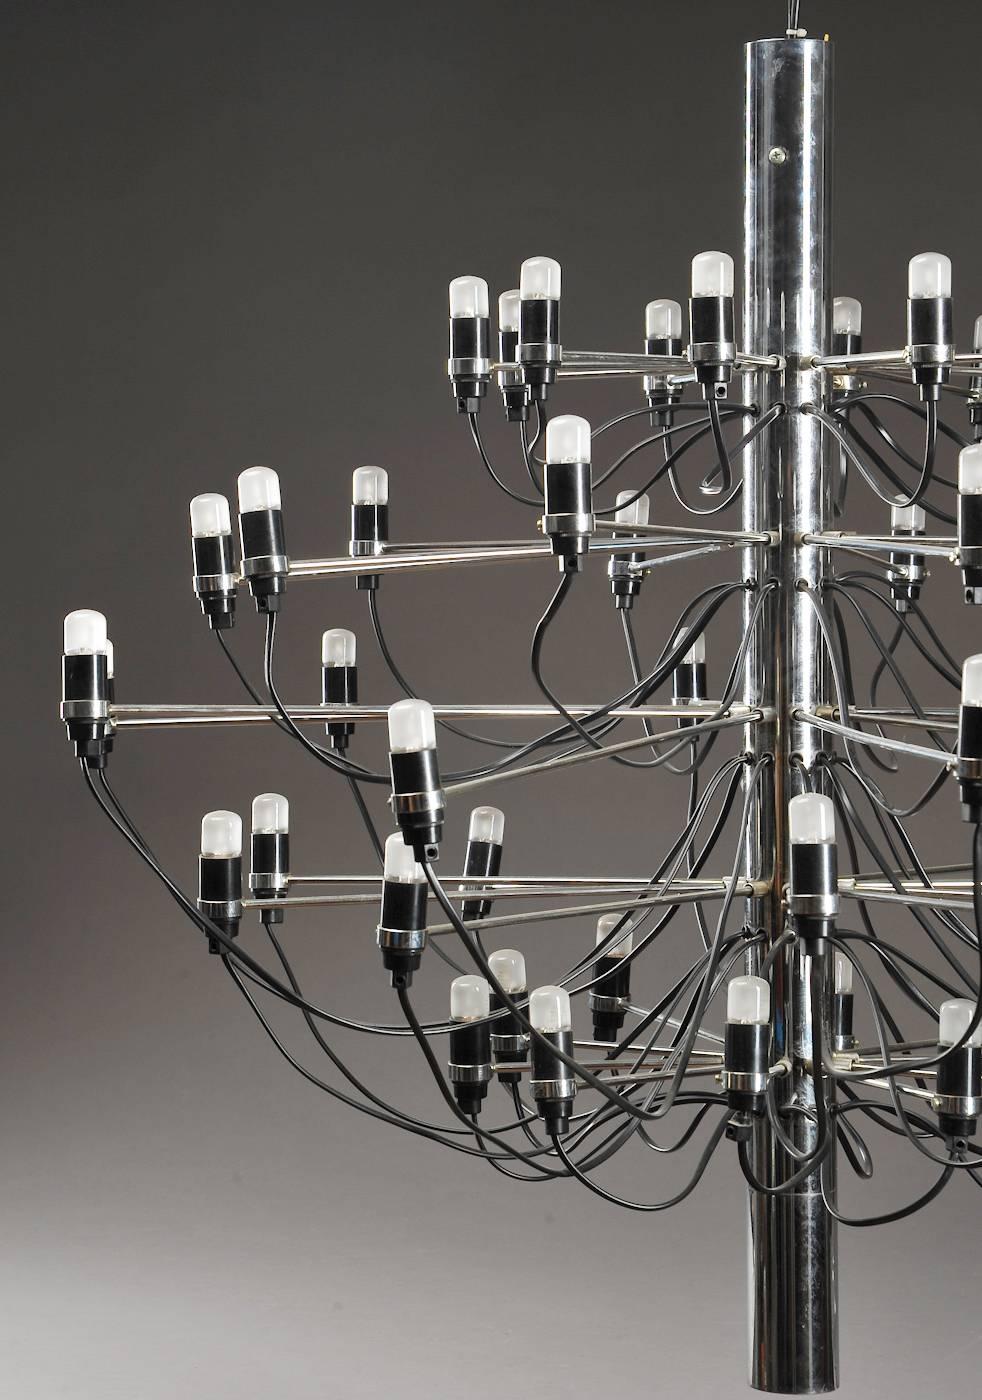 A "2097/50" ceiling lamp designed by Gino Sarfatti for Flos, Italy, 1958.
Beautiful original condition with 50 E14 sockets (also for LED bulbs).
Measures: Height 90cm (35"), diameter 102cm (40").
Lamp will be shipped with